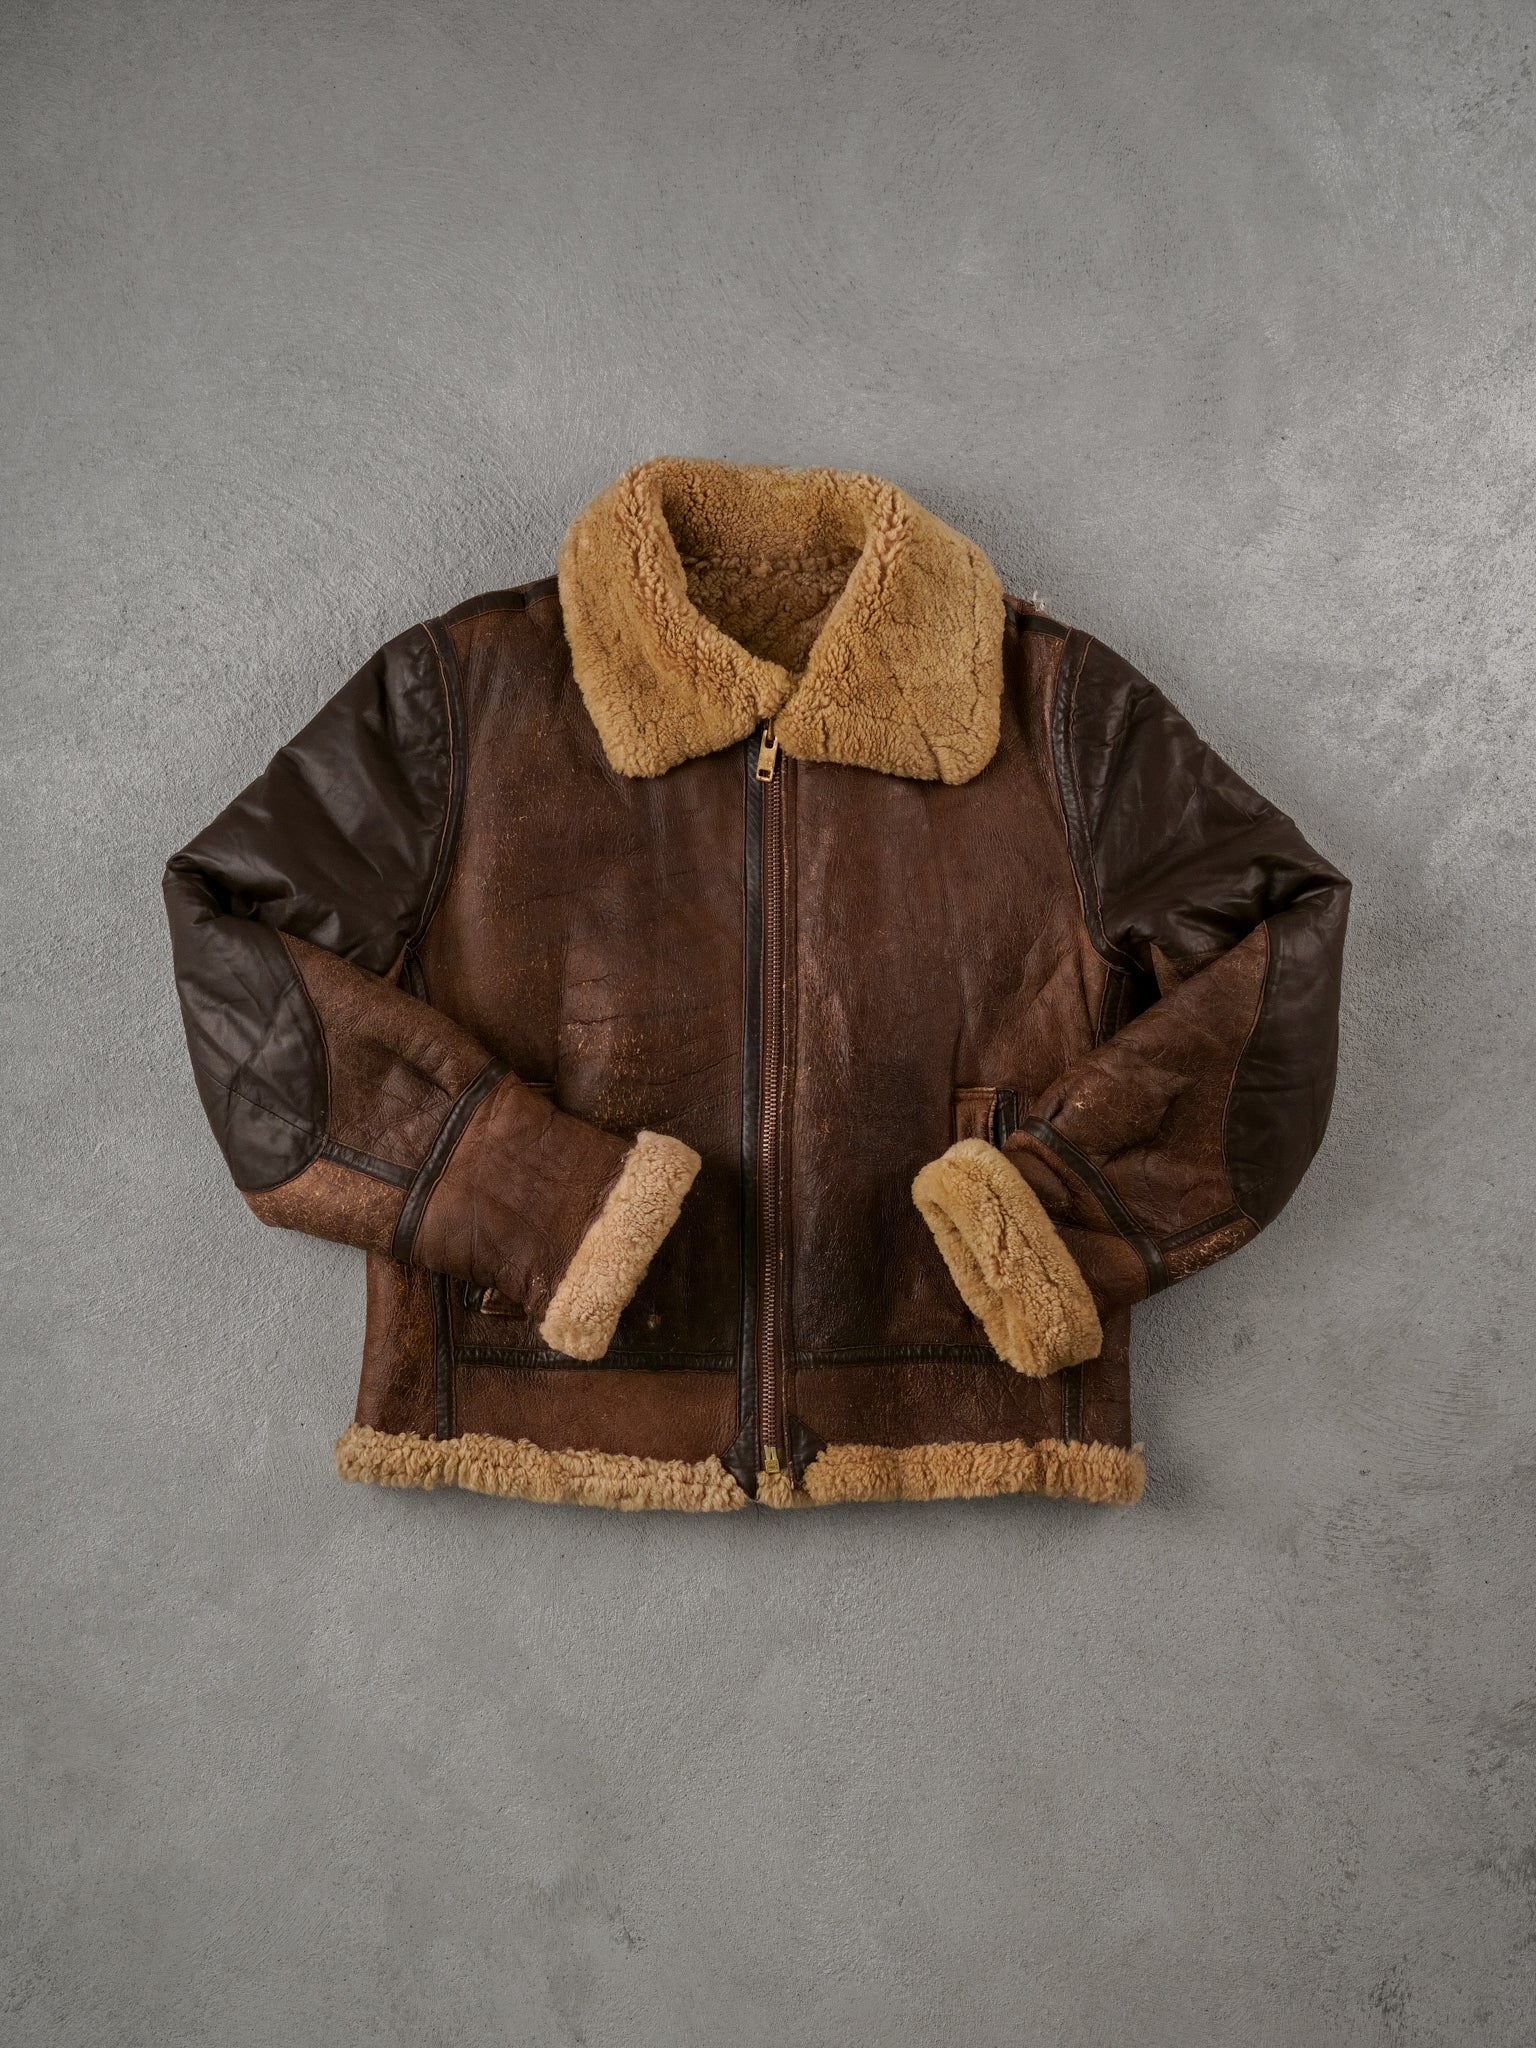 Vintage 80s Brown Sawyer Shearling Collared Jacket (M/L)